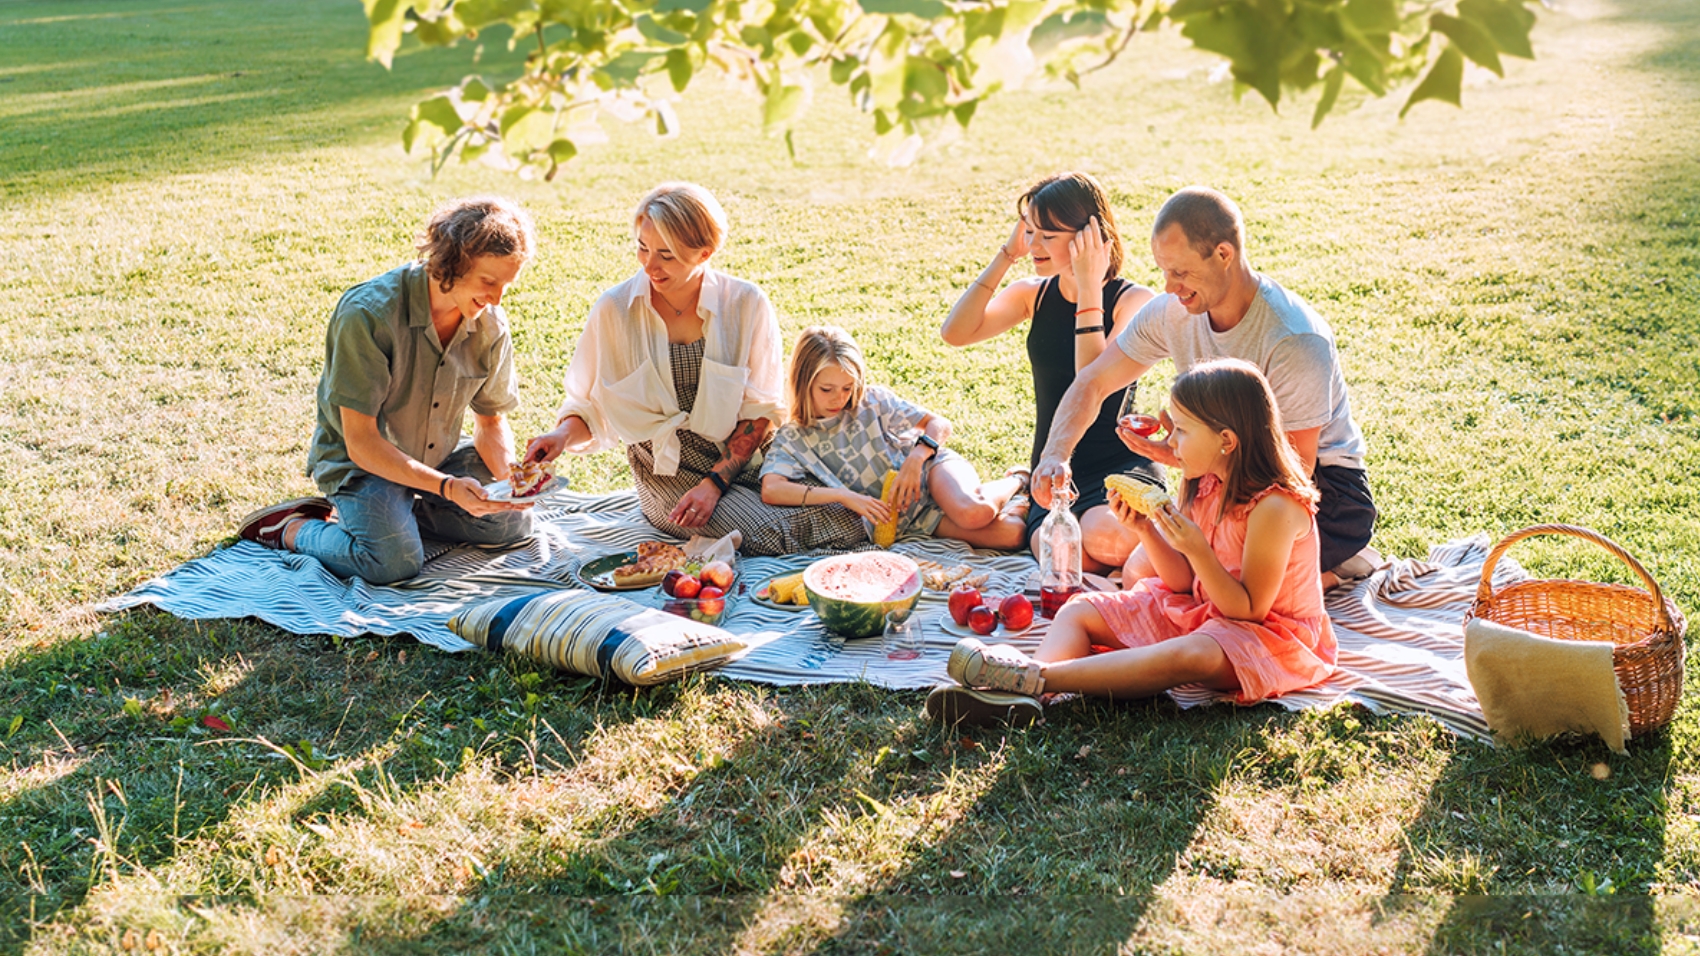 Image of people enjoying a picnic in the park